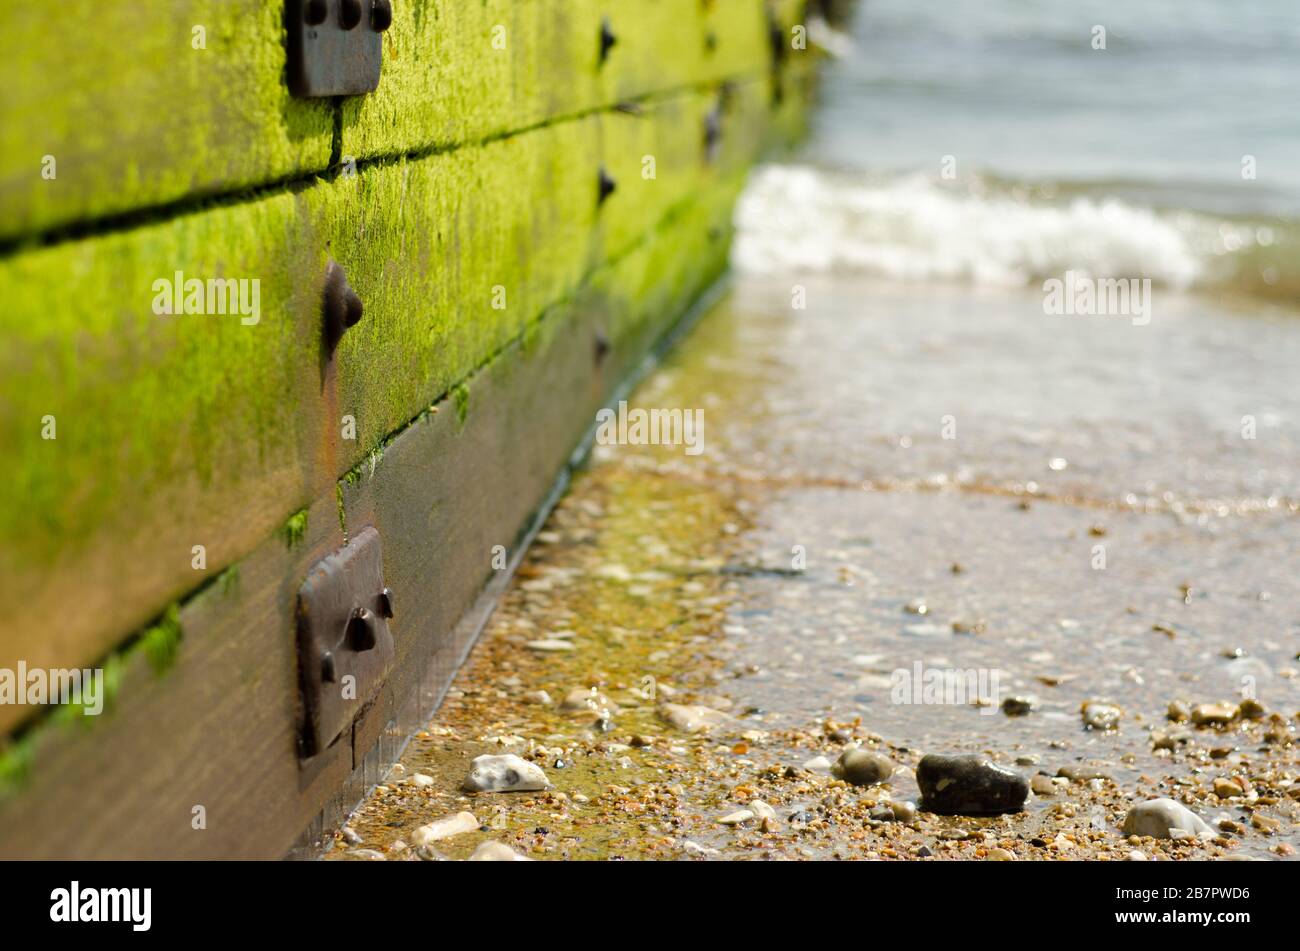 A weather beaten wooden groyne on an Isle of Wight shingle beach worn smooth by waves. Stock Photo